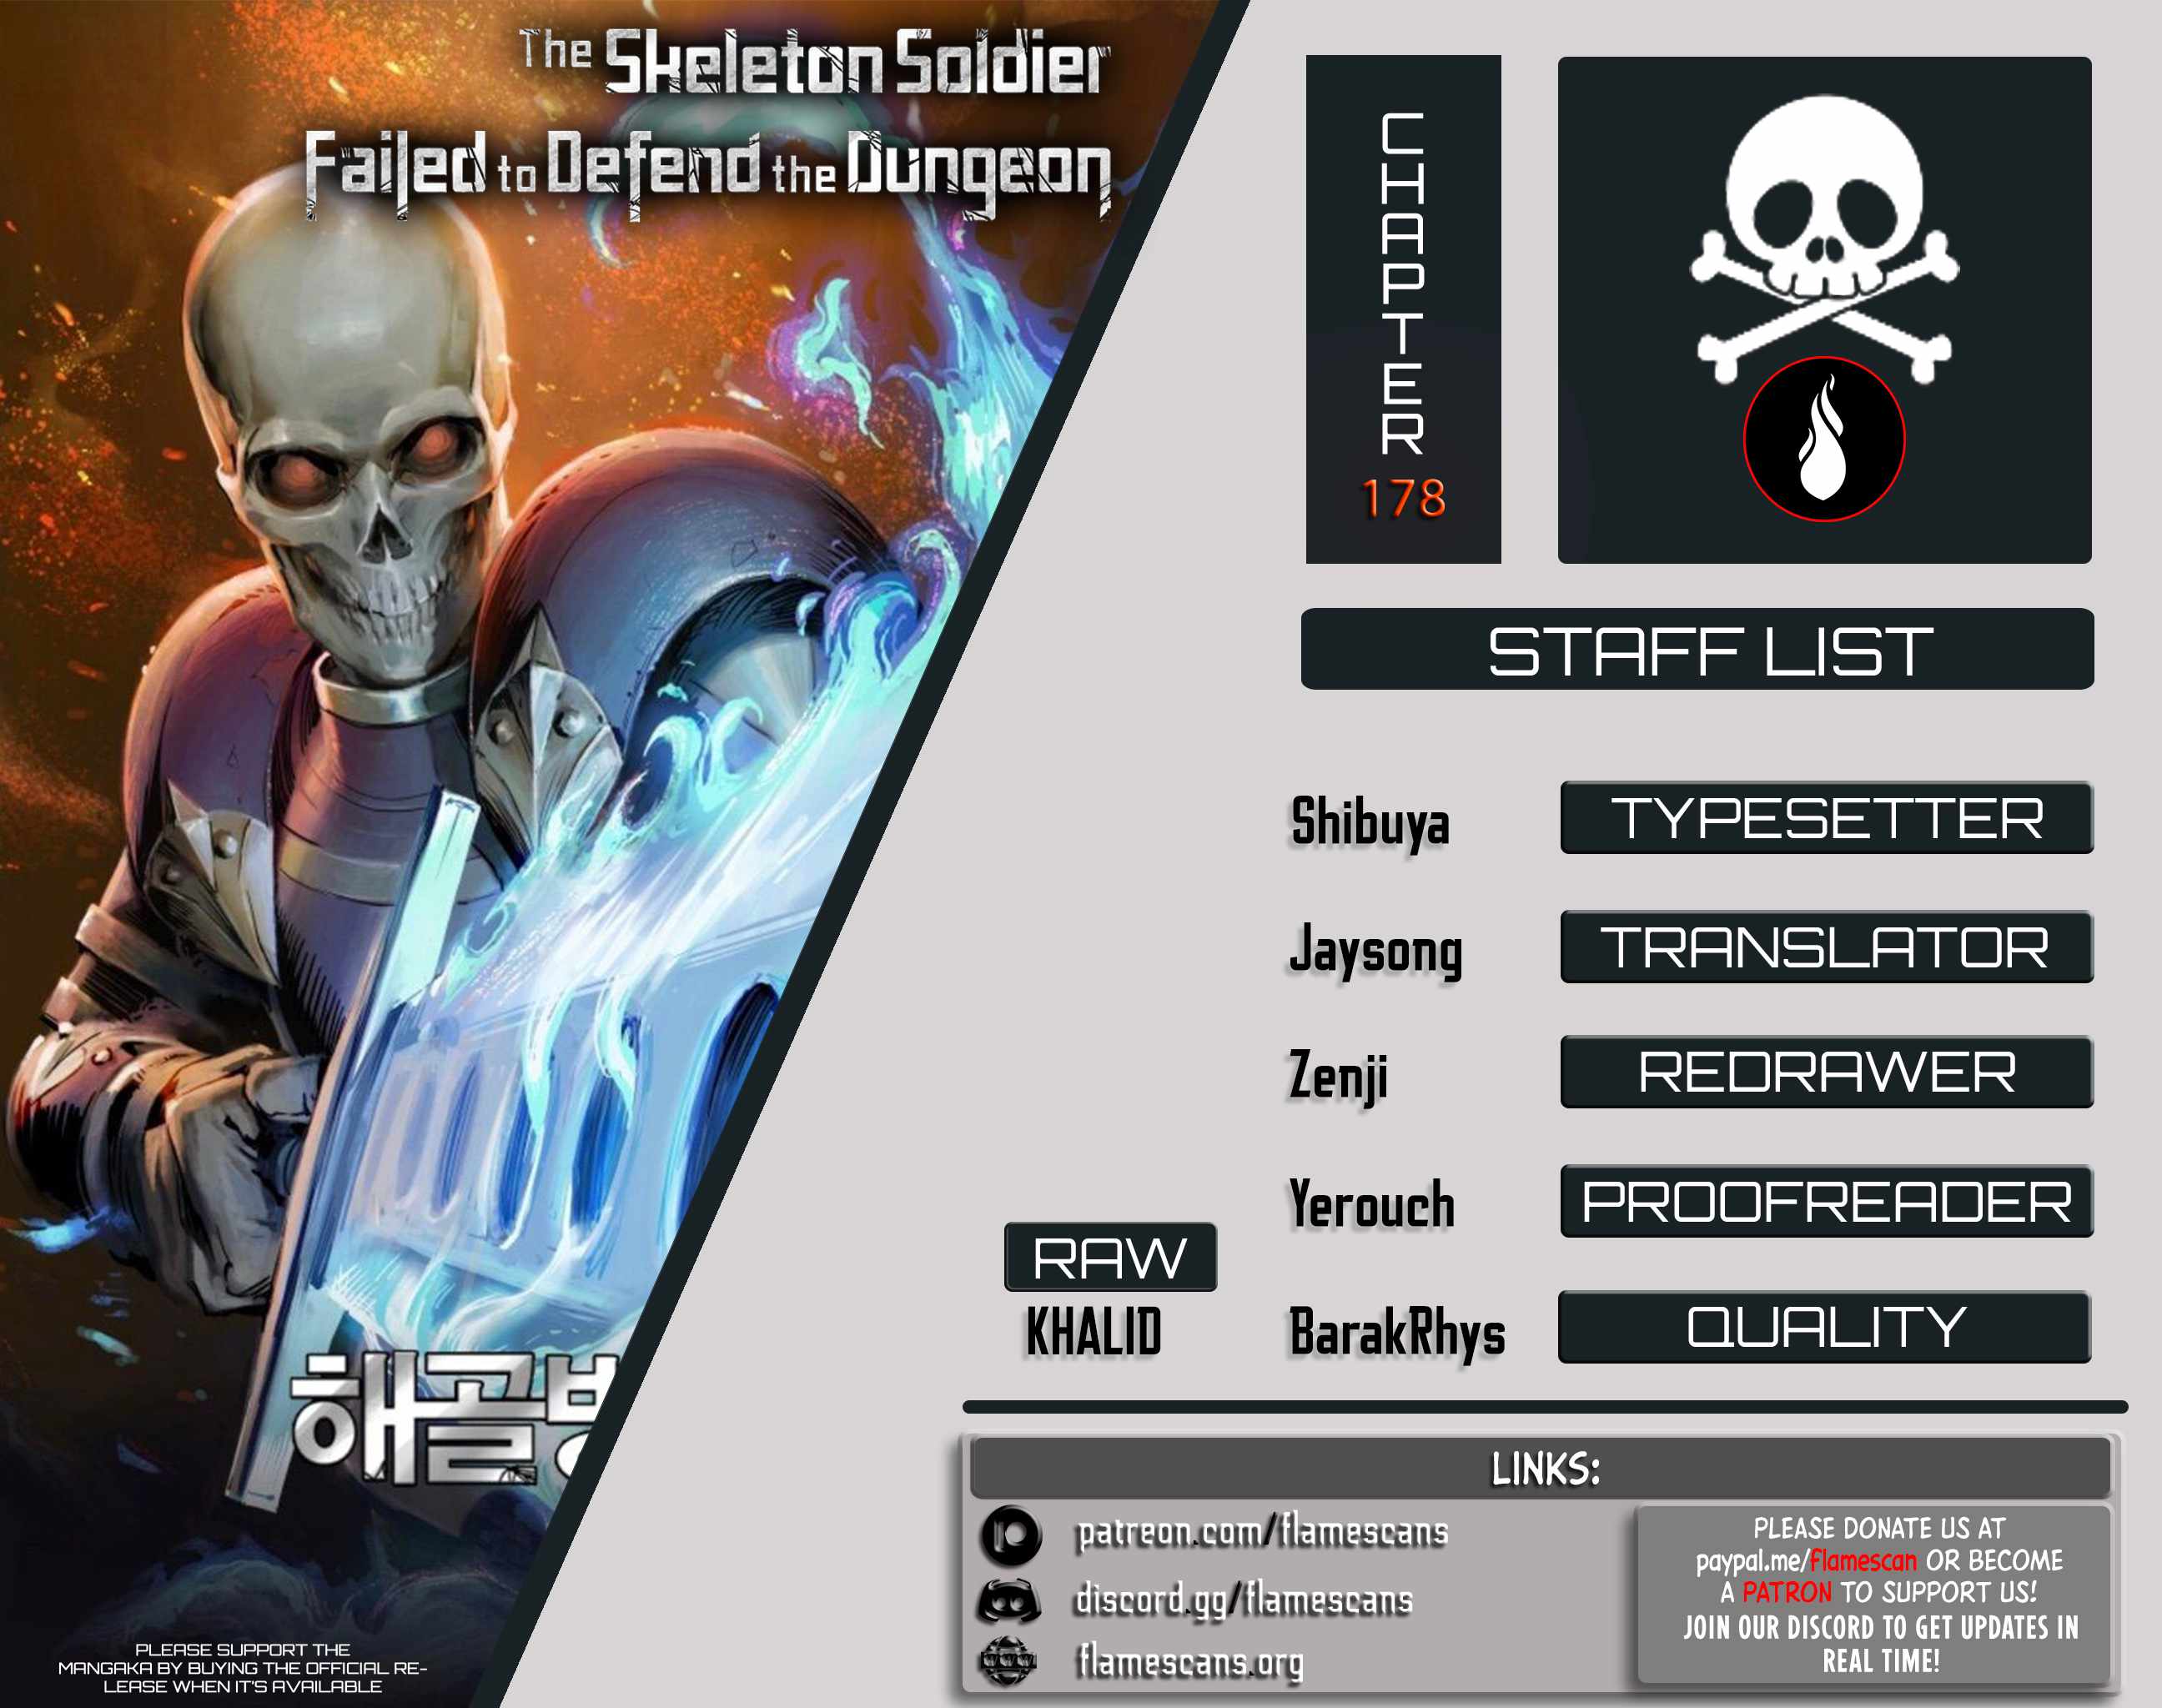 The Skeleton Soldier Failed to Defend the Dungeon [Official] chapter 178